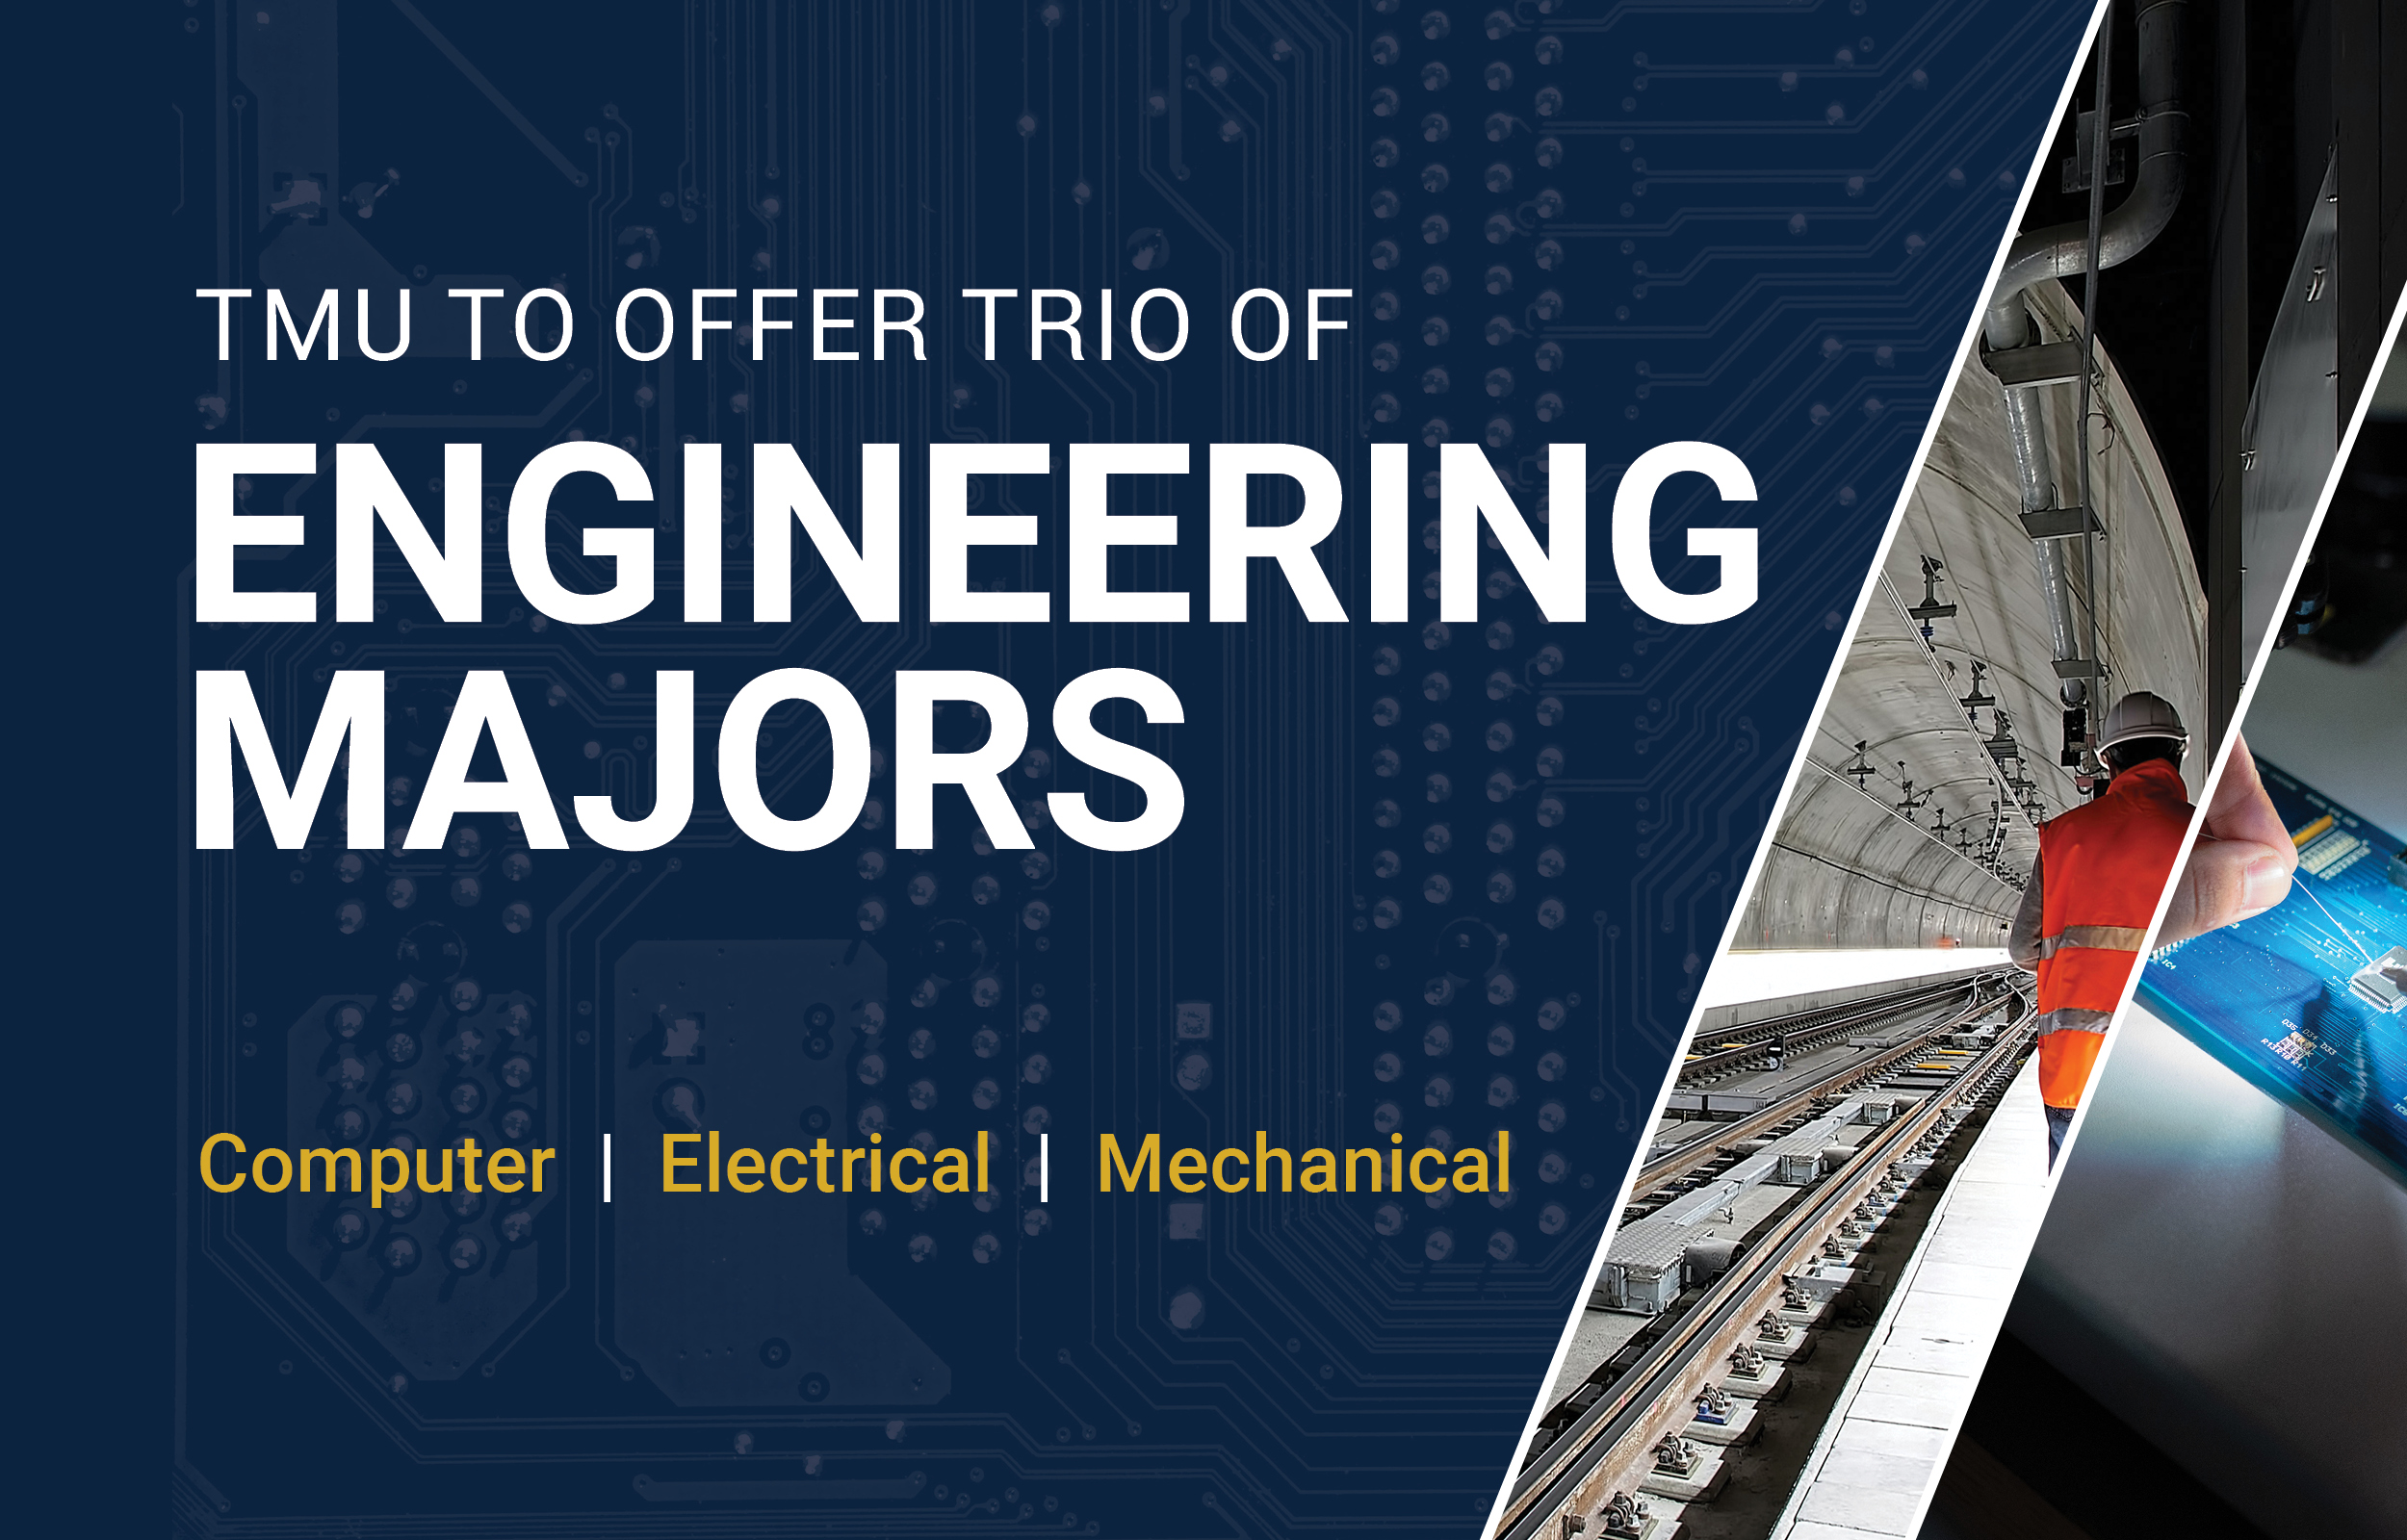 TMU To Offer Trio of Engineering Majors Featured Image